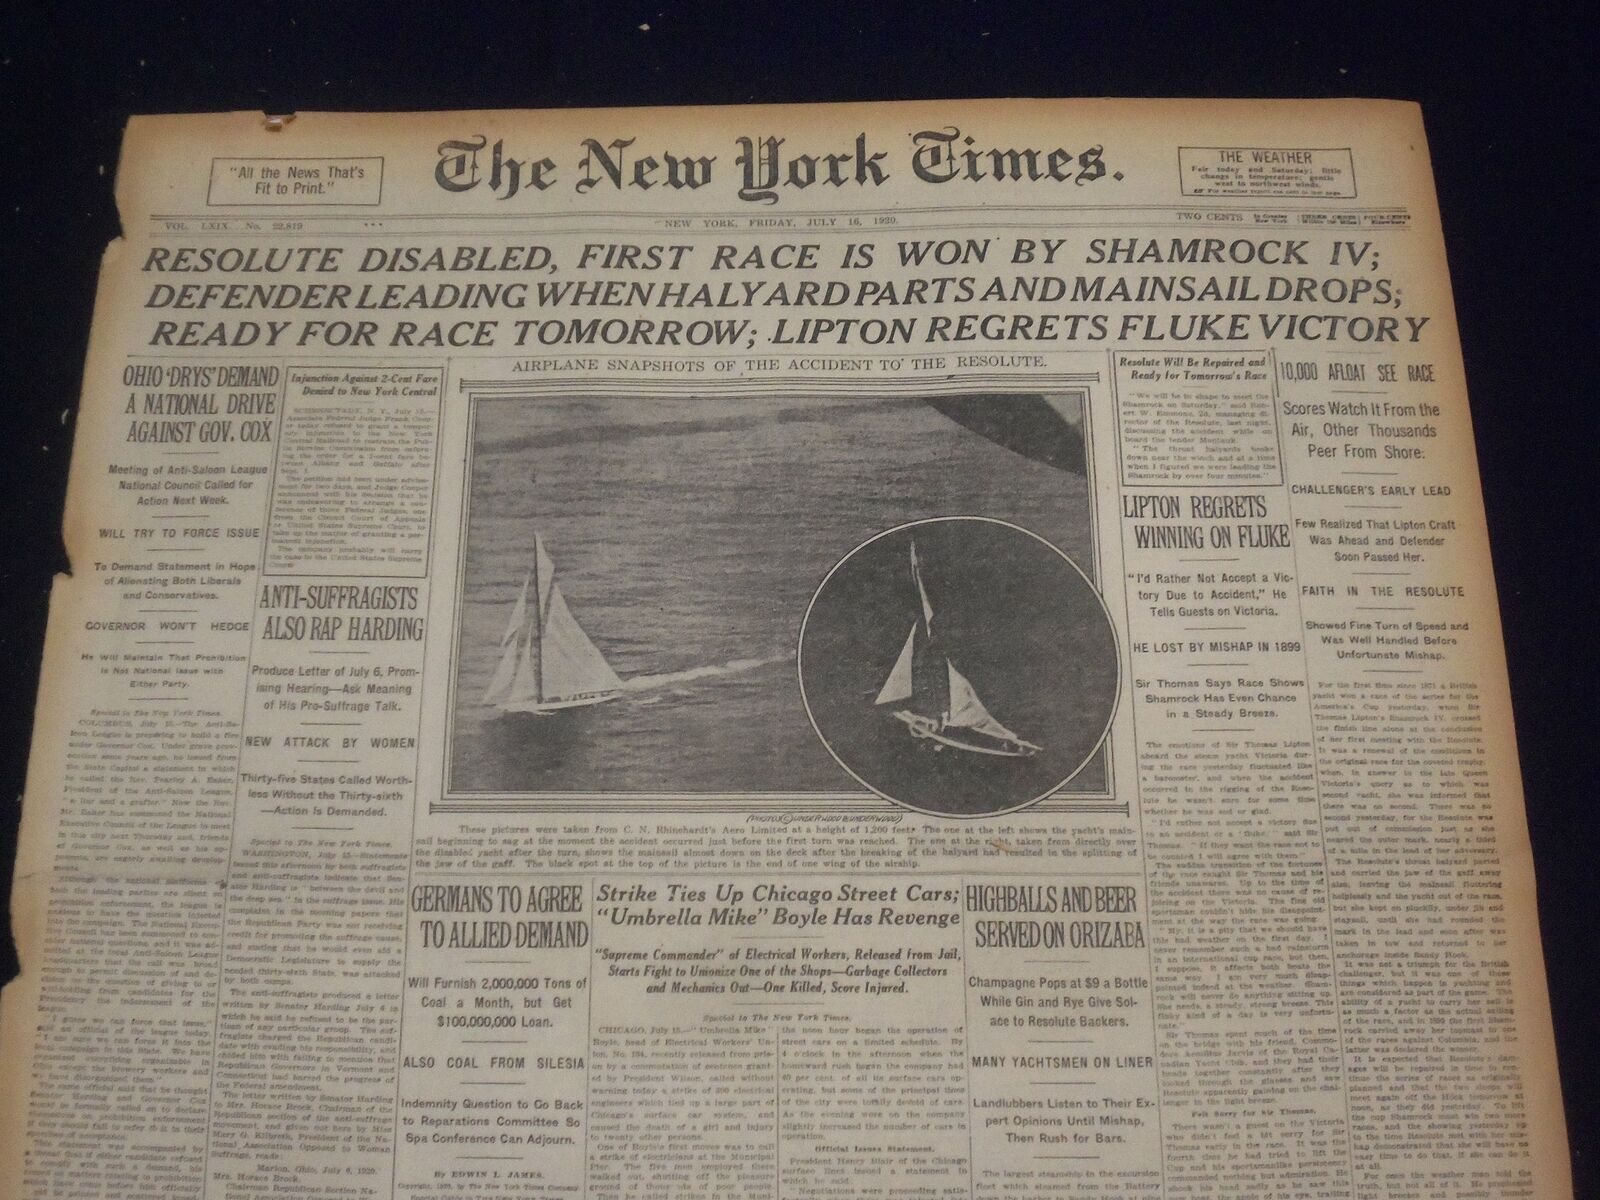 1920 JULY 16 NEW YORK TIMES - RESOLUTE DISABLED, SHAMROCK IV WINS - NT 9331